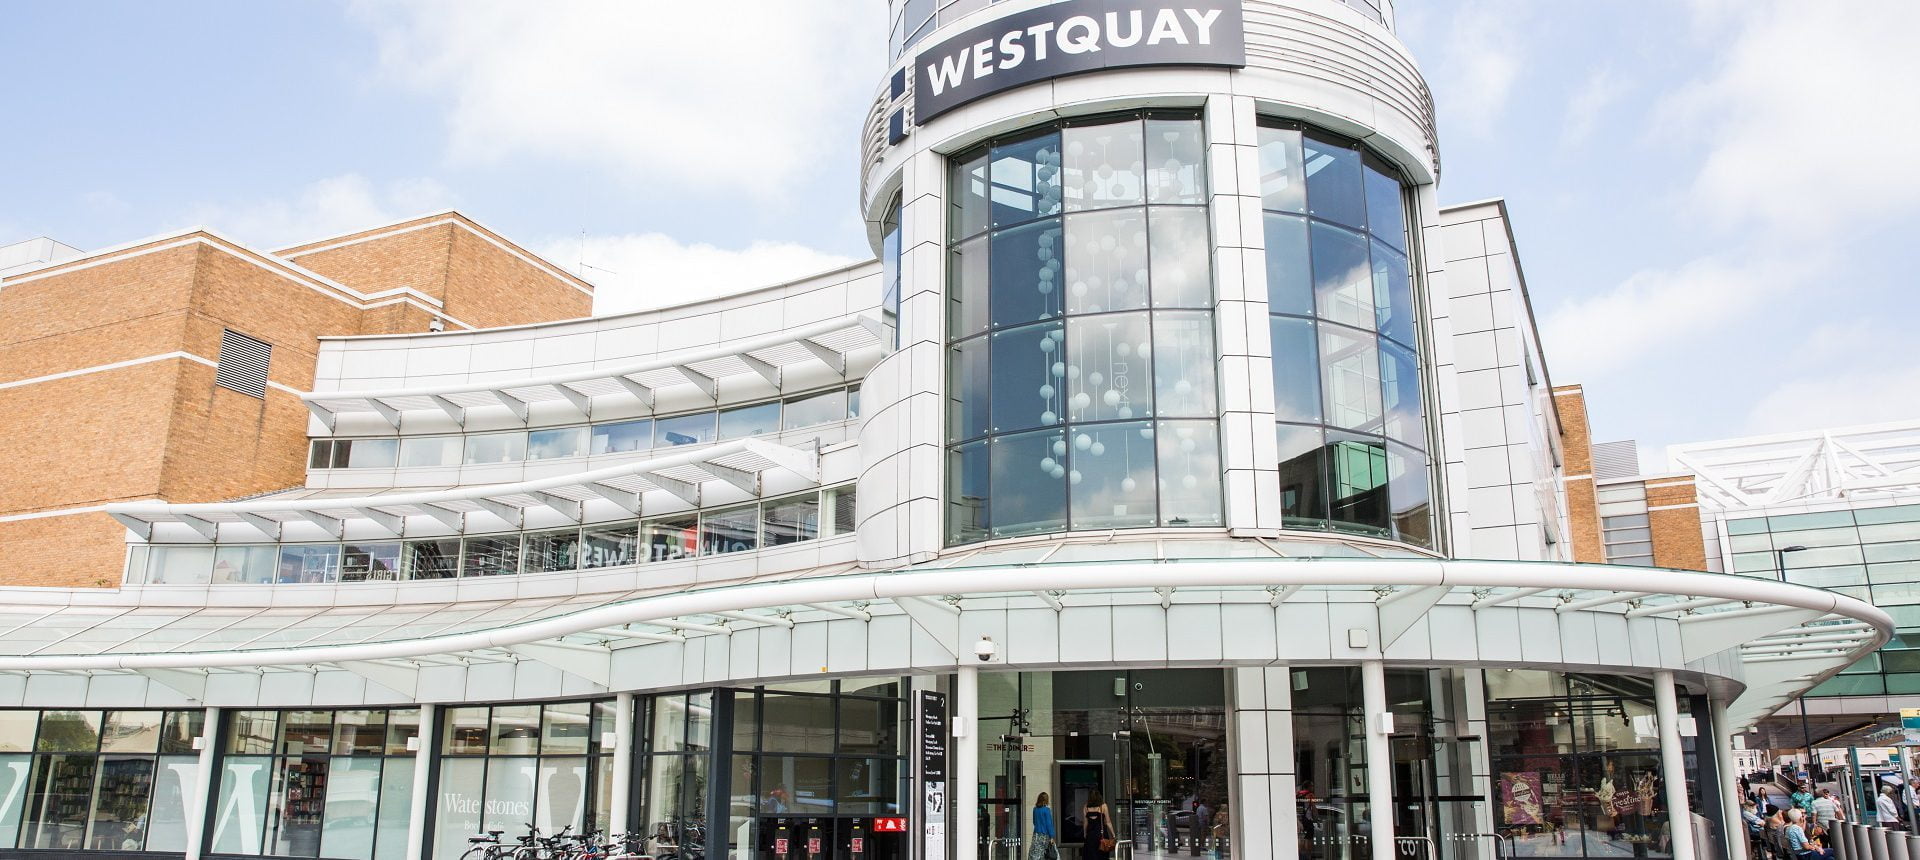 Exterior Shot of second Entrance at West Quay